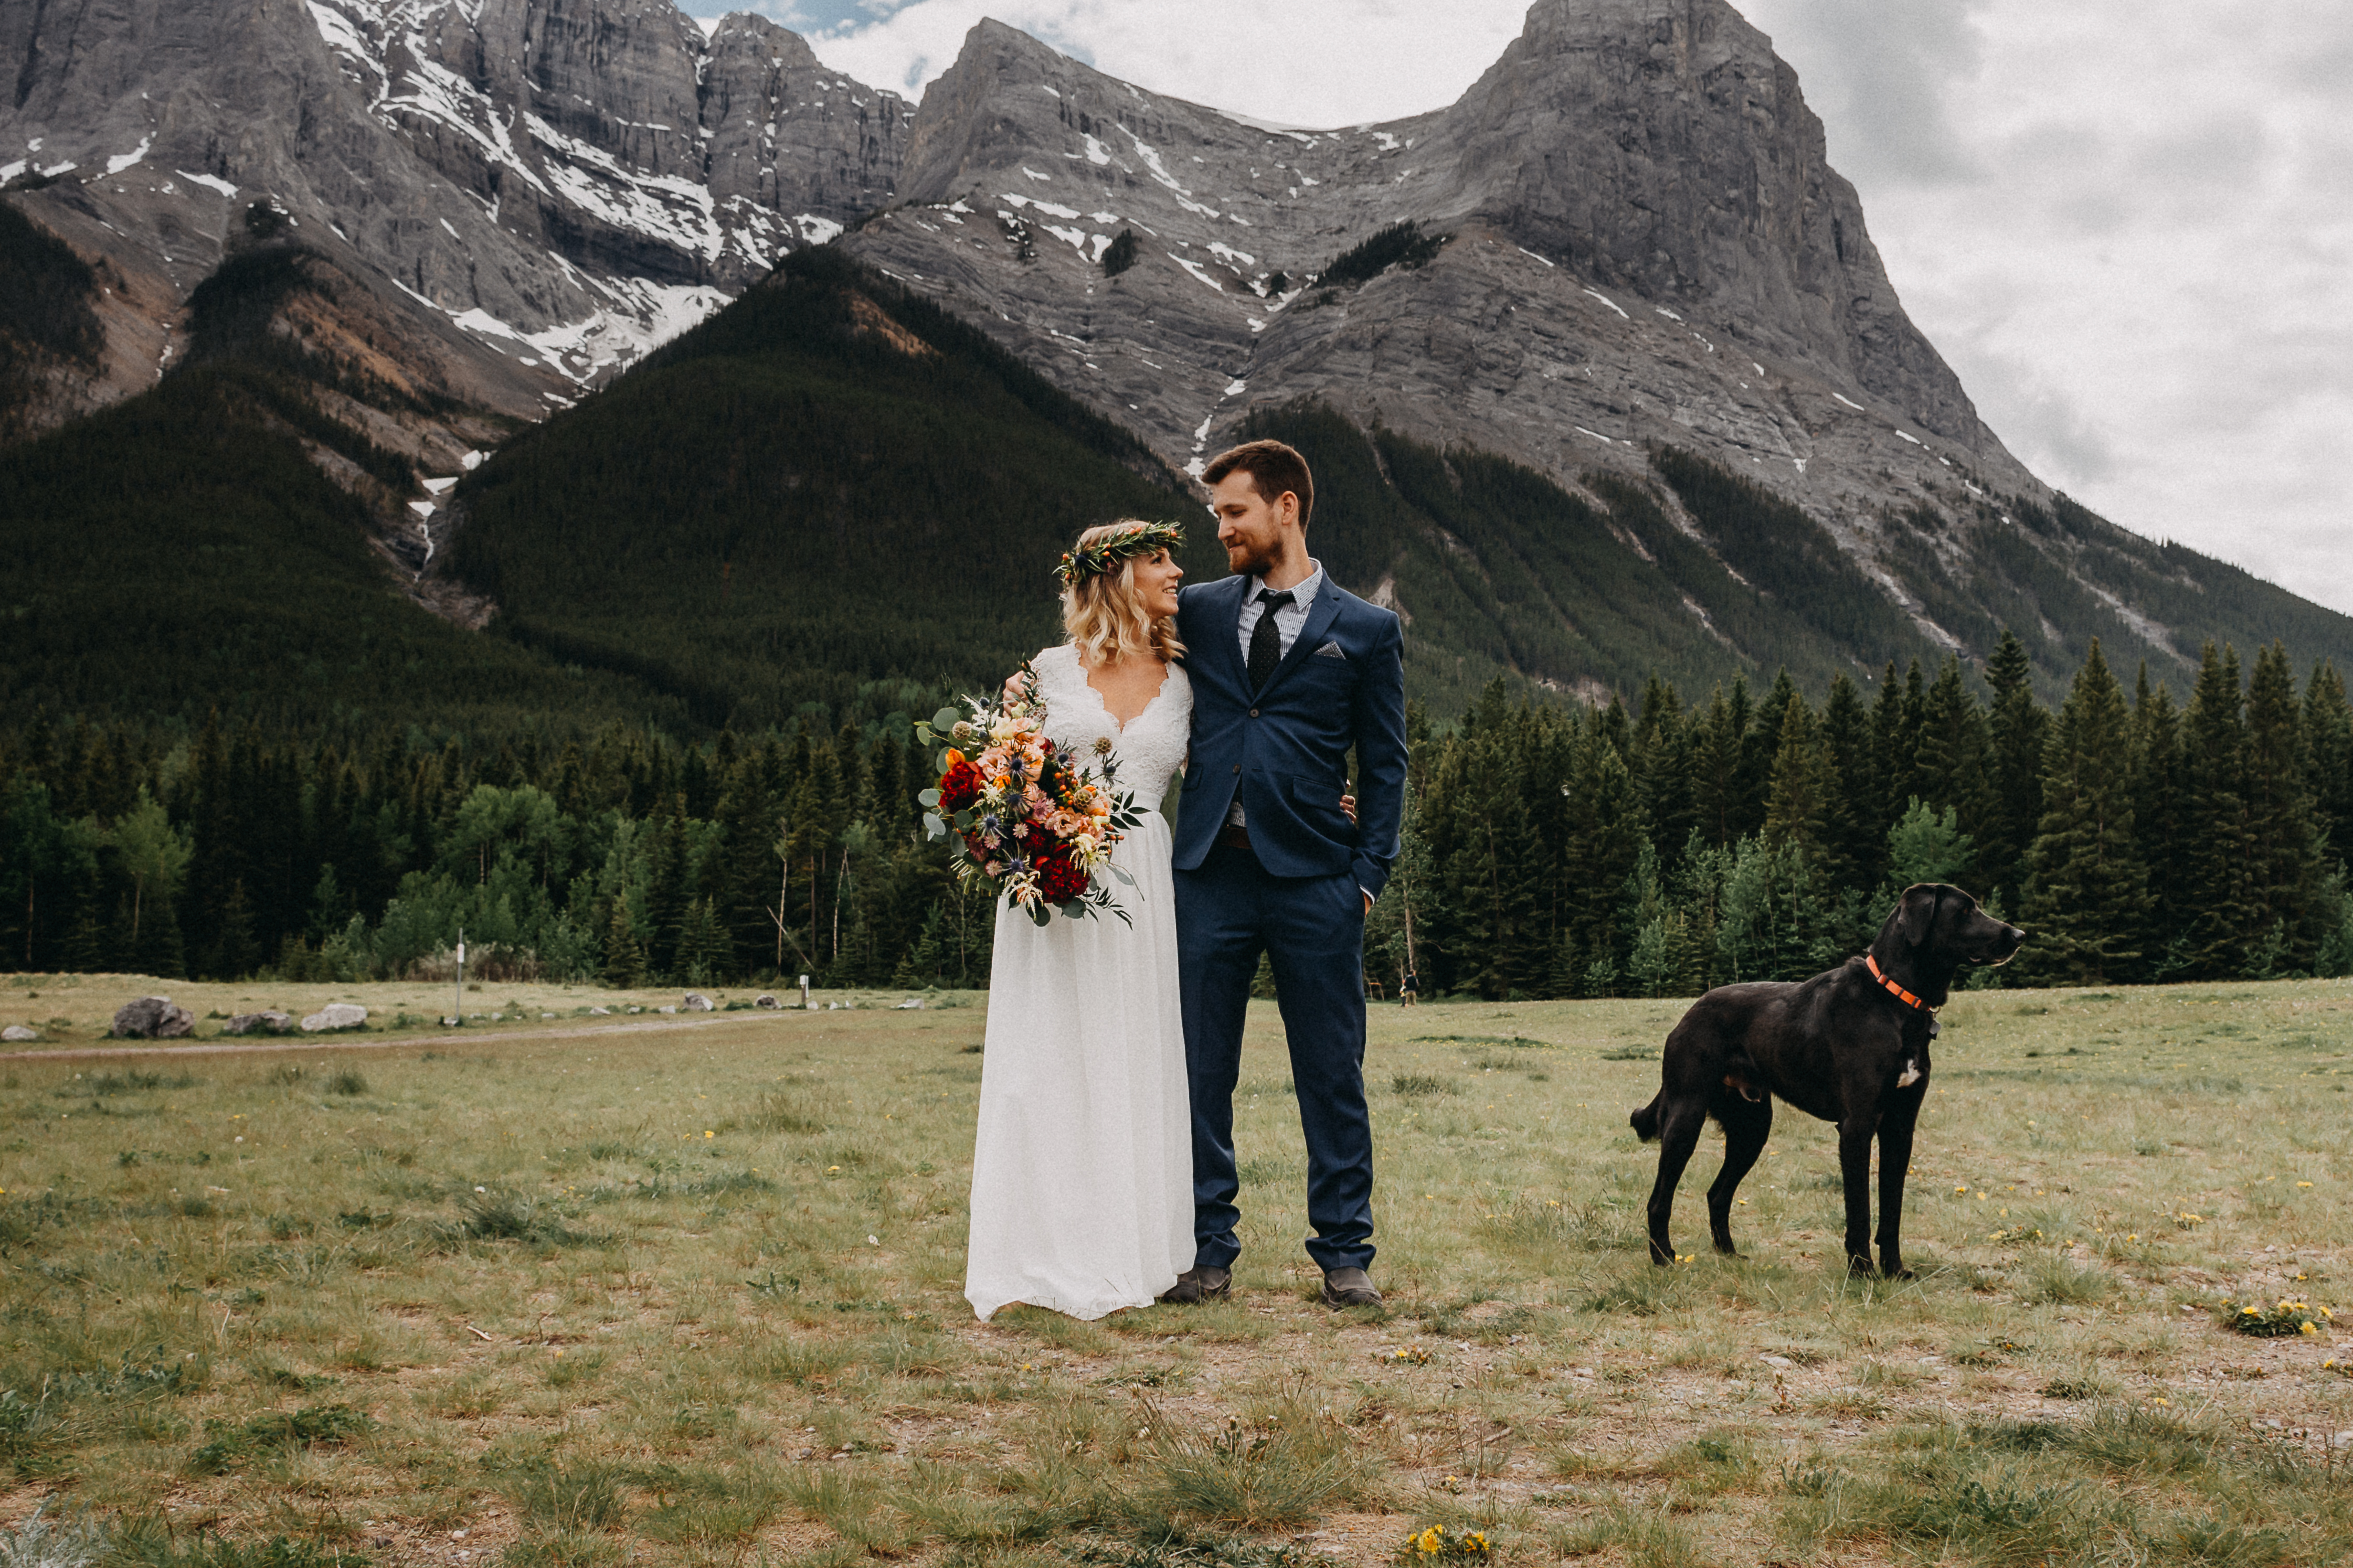 The bride and groom looking at each other and their dog in front of the rocky mountains